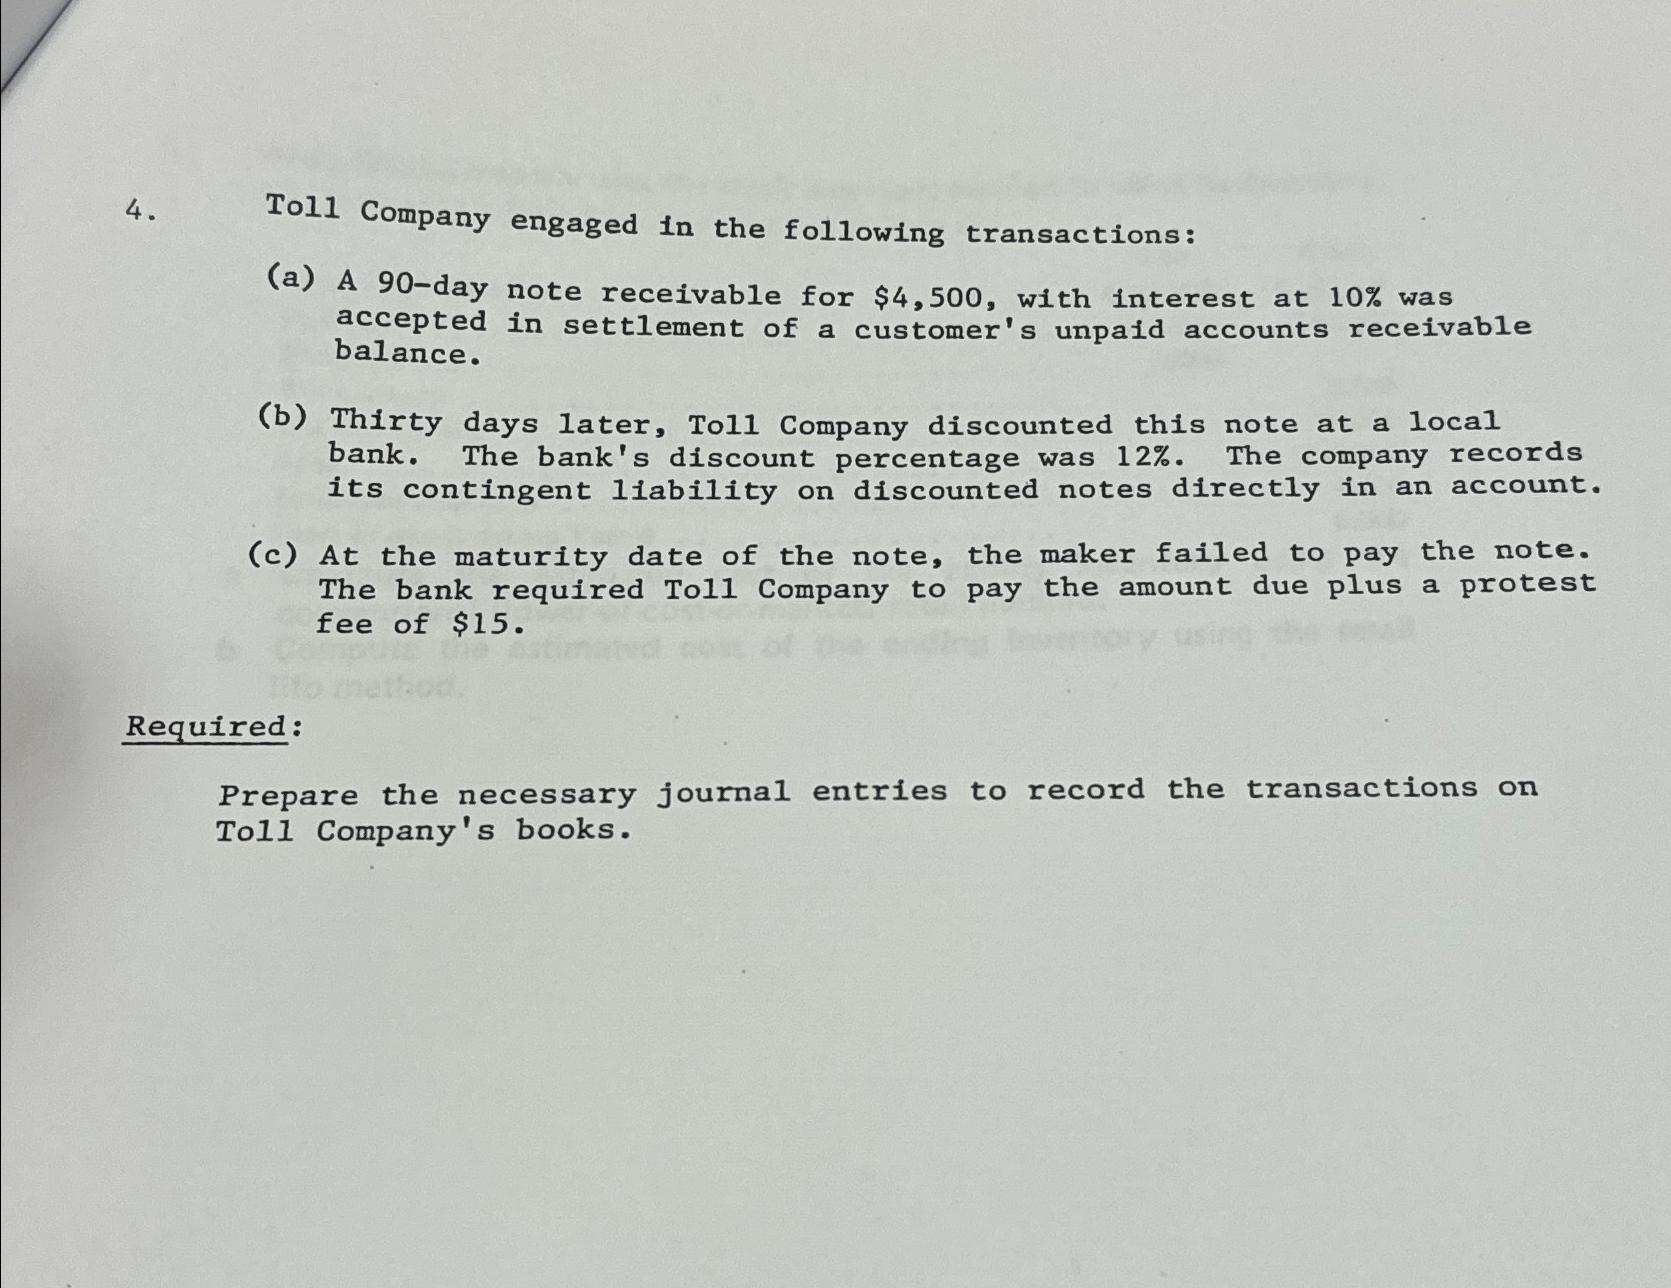 4. Toll Company engaged in the following transactions: (a) A 90-day note receivable for $4,500, with interest